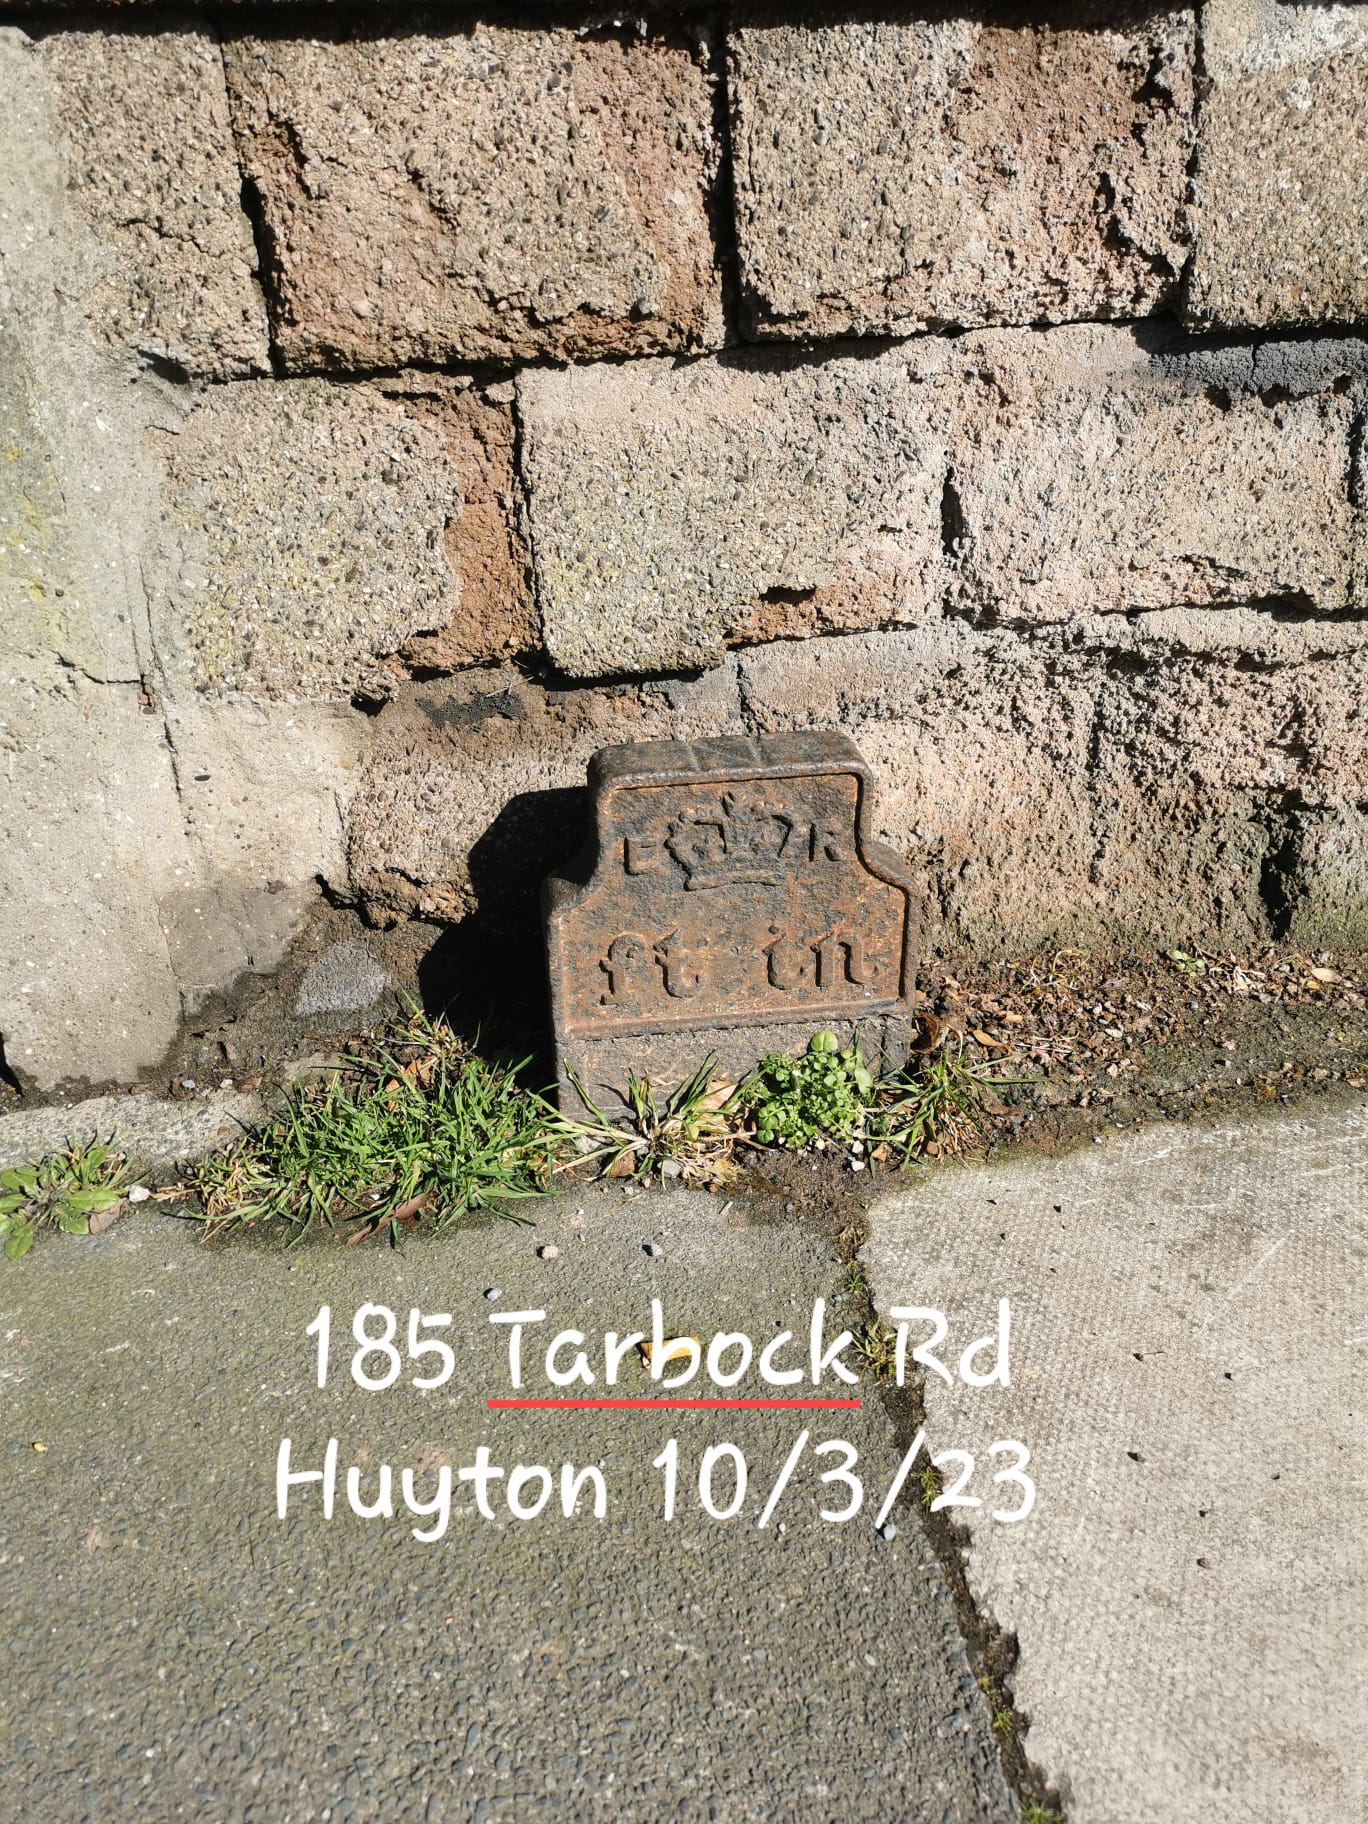 Telegraph cable marker post at 185 Tarbock Road, Huyton, Liverpool by Jan Gibbons 